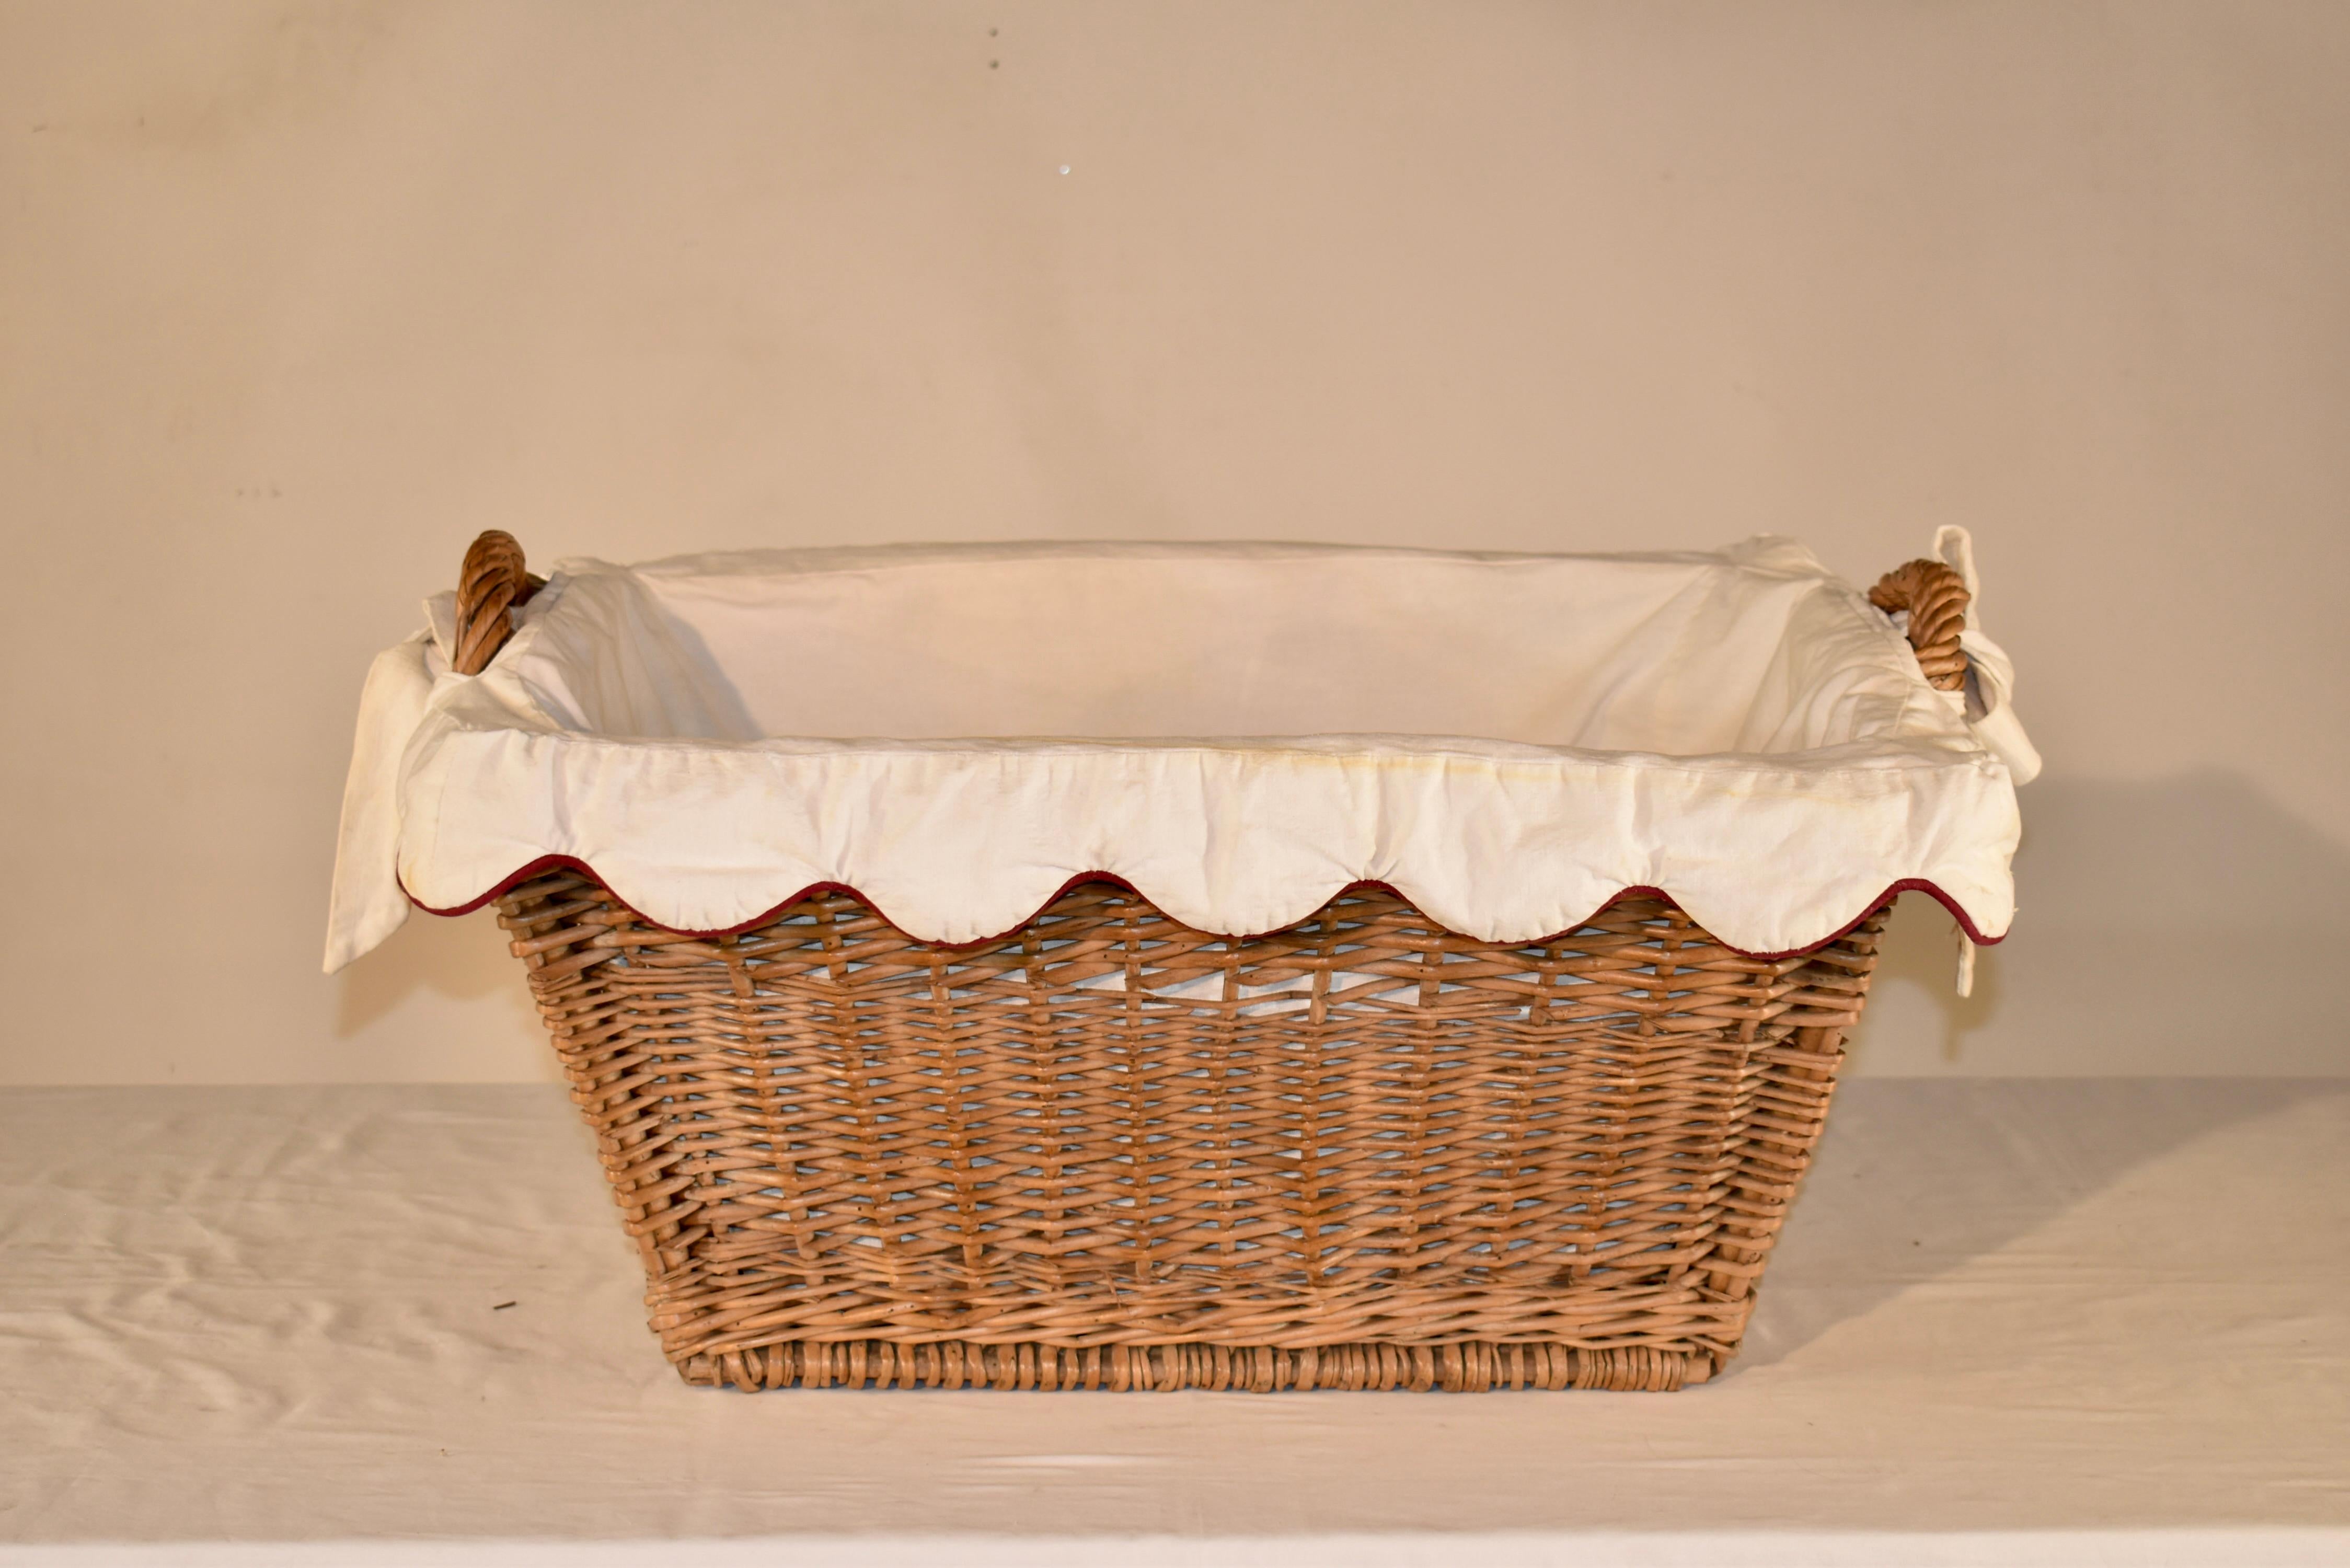 Circa 1920 wicker laundry basket from France with a hand made linen basket liner with burgundy welting.  The liner ties around the handles of the basket.  Great look for any room of the house or office!